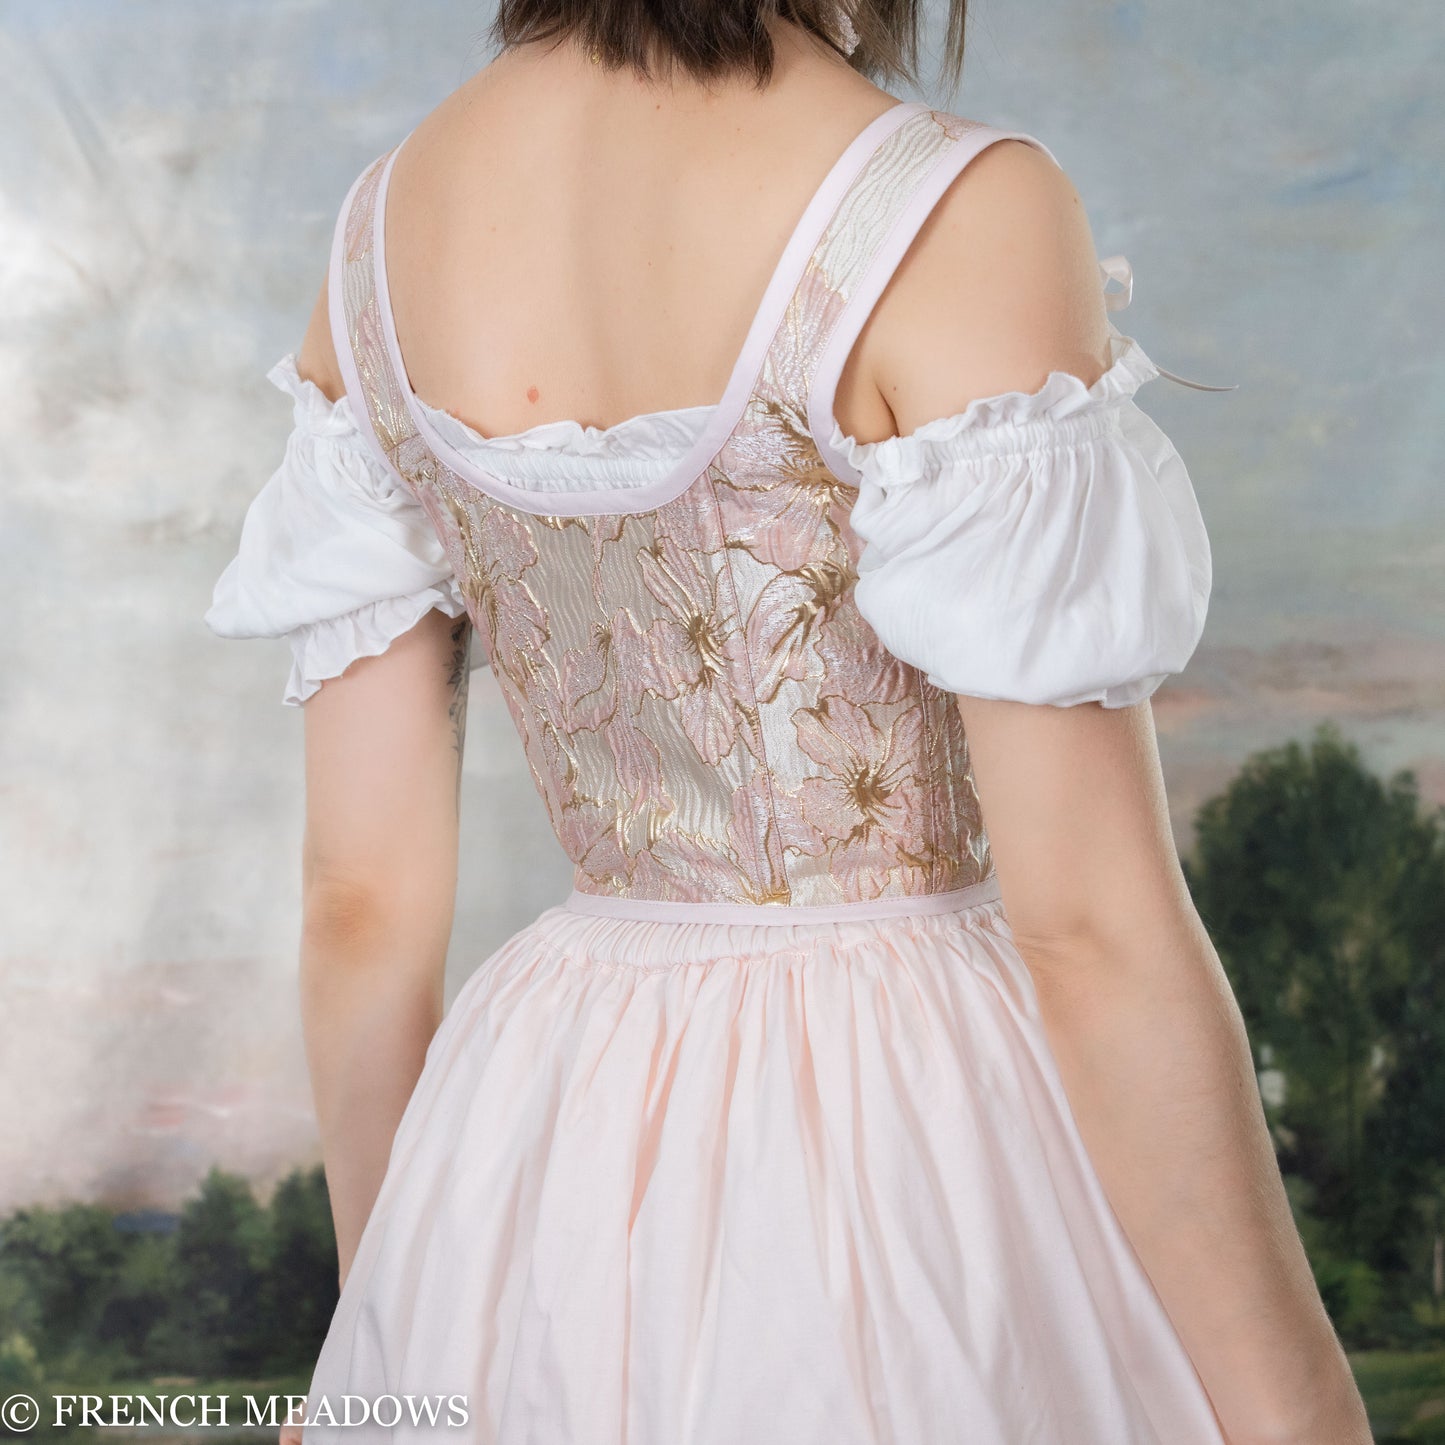 Pink and Metallic Gold Floral Renaissance Bodice